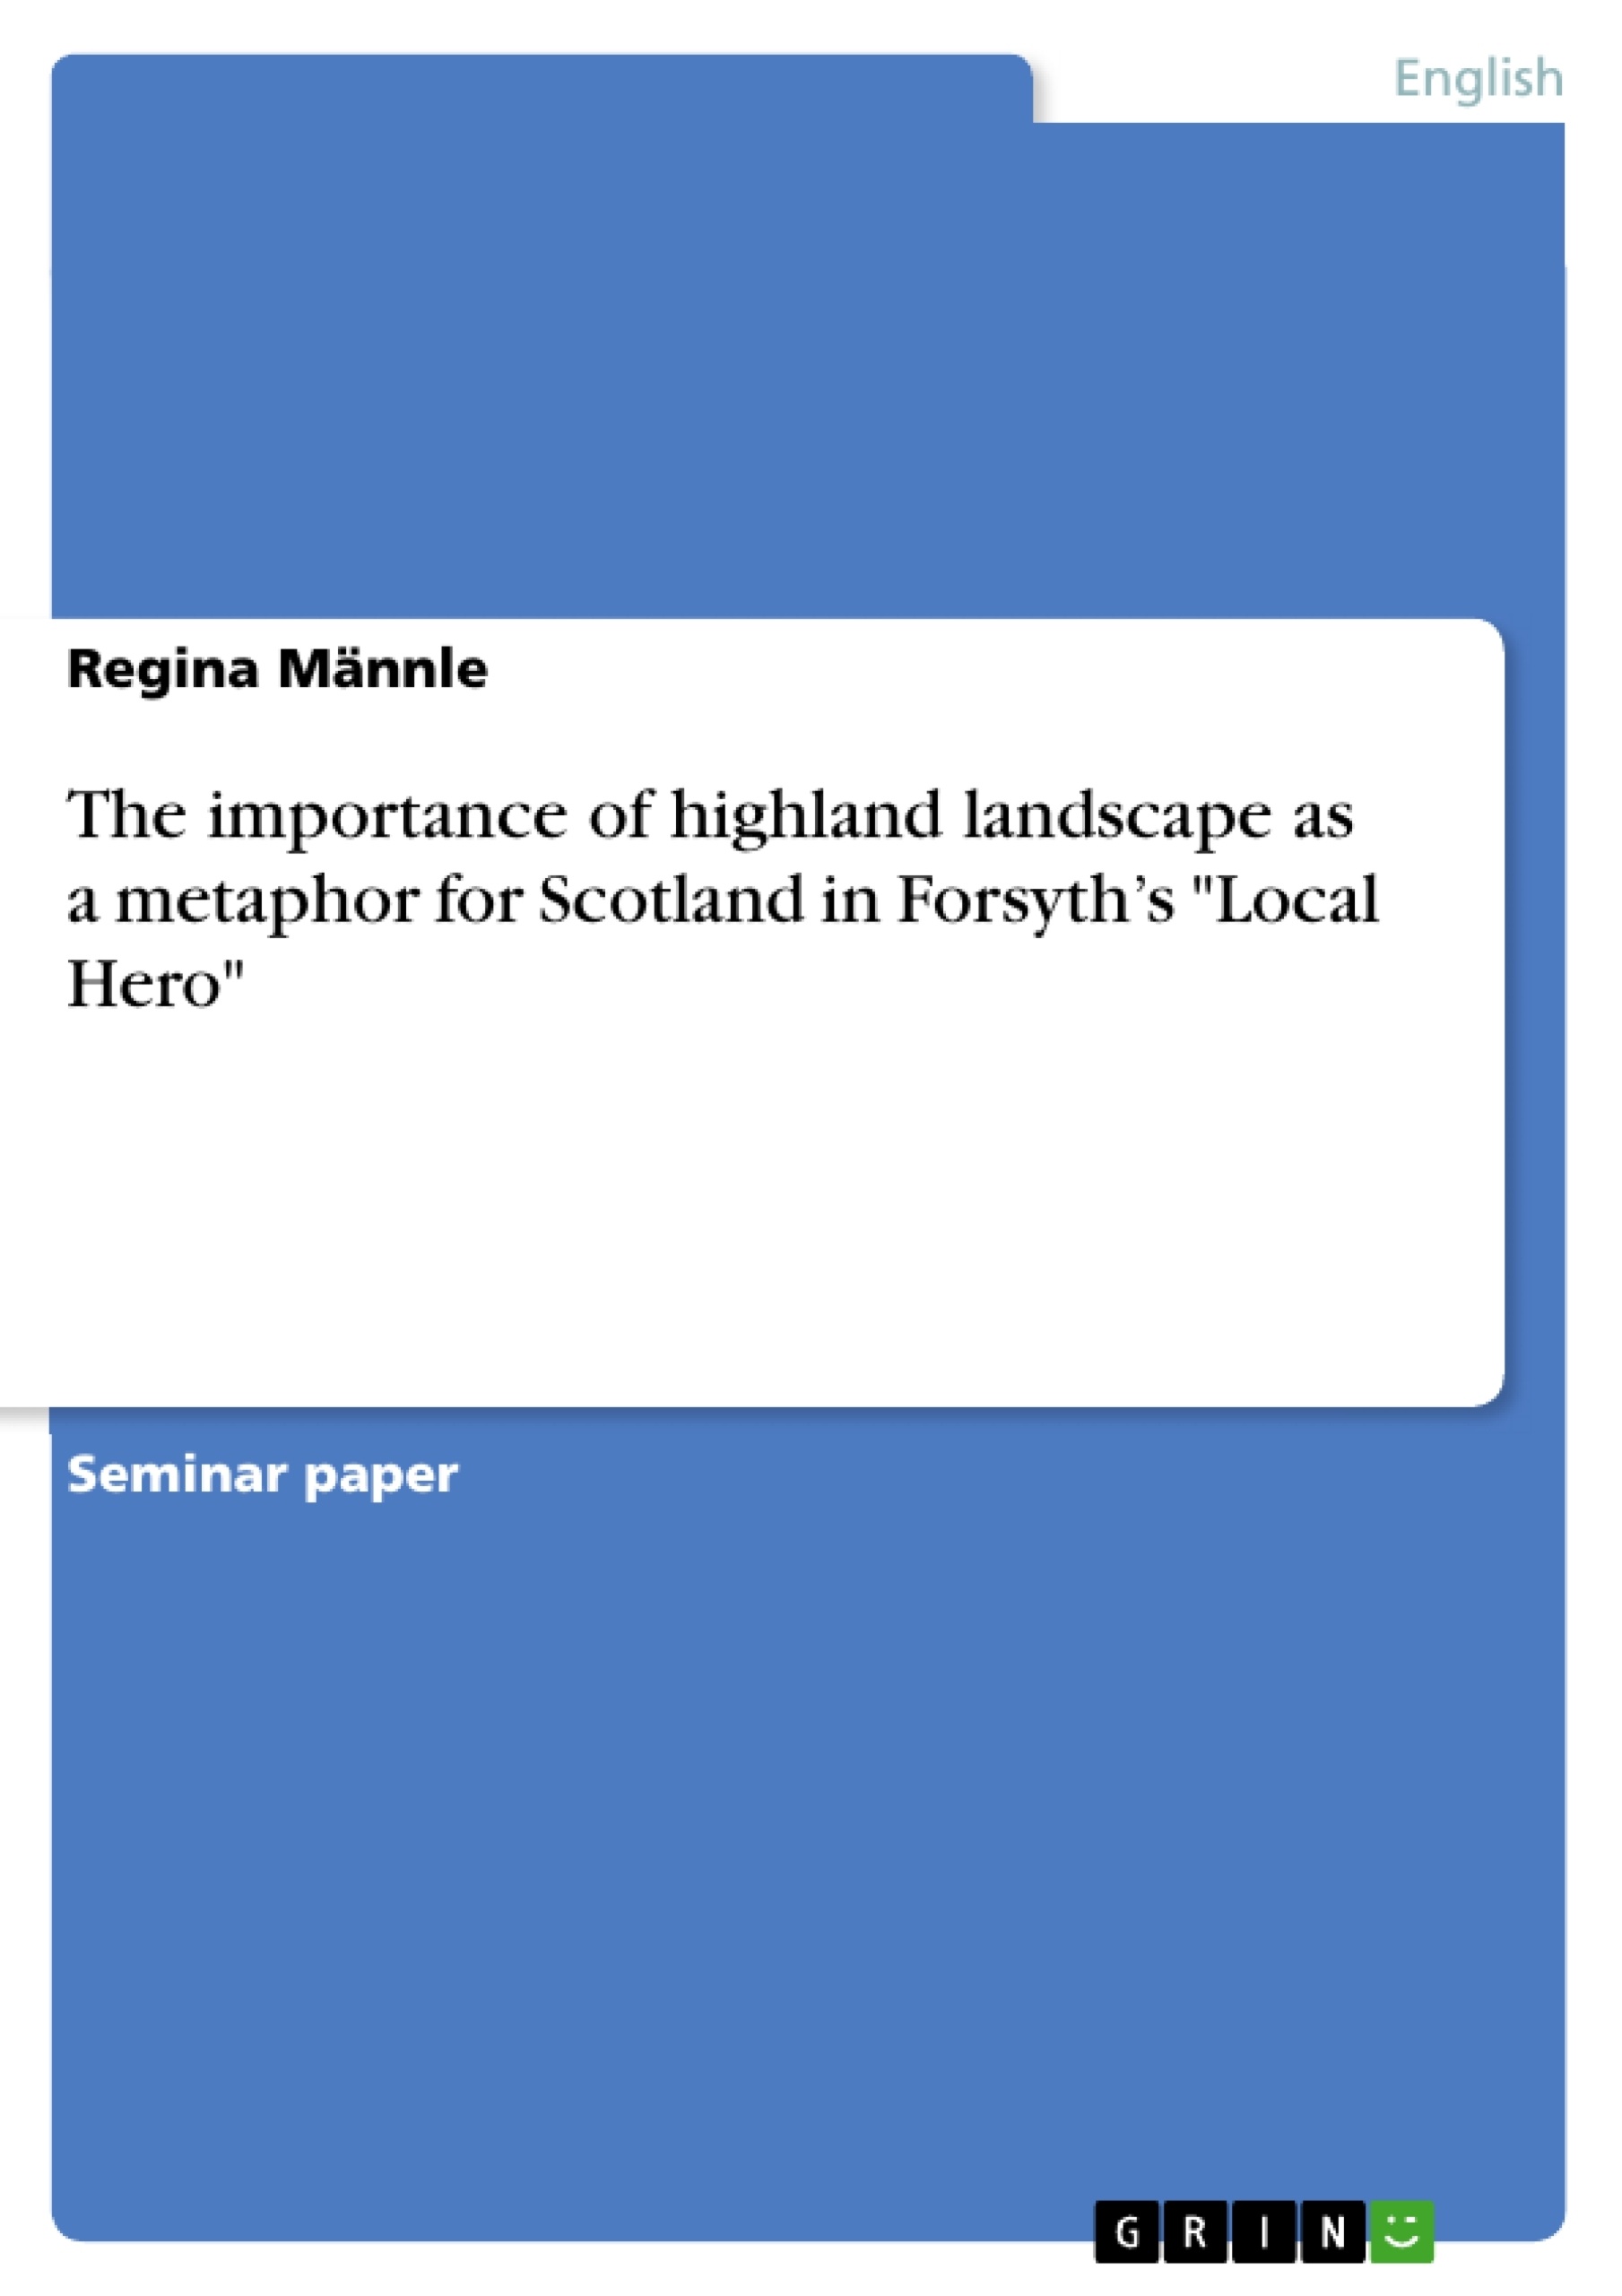 Titre: The importance of highland landscape as a metaphor for Scotland in Forsyth’s "Local Hero"